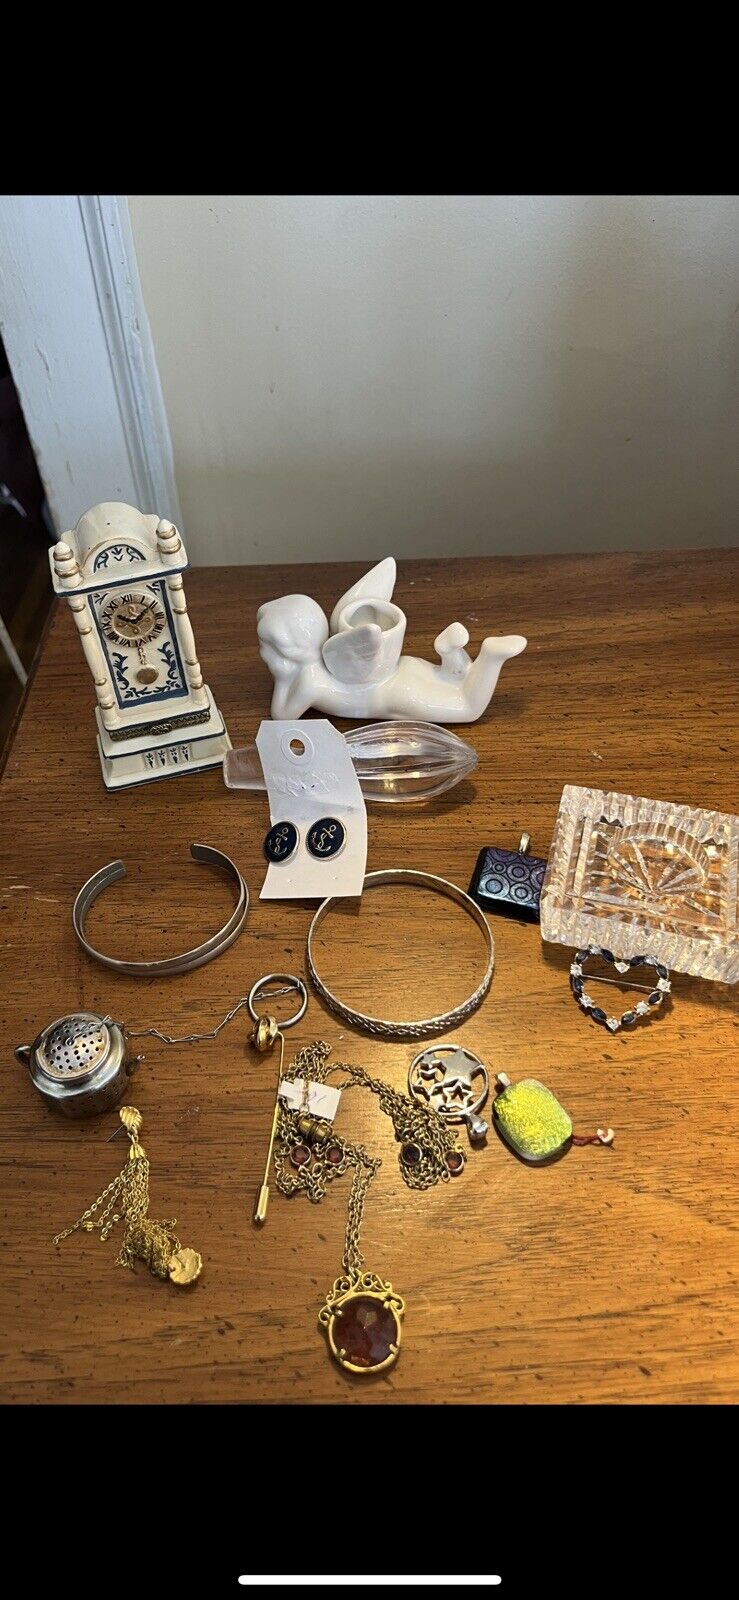 Contents of junk/miscellaneous drawer